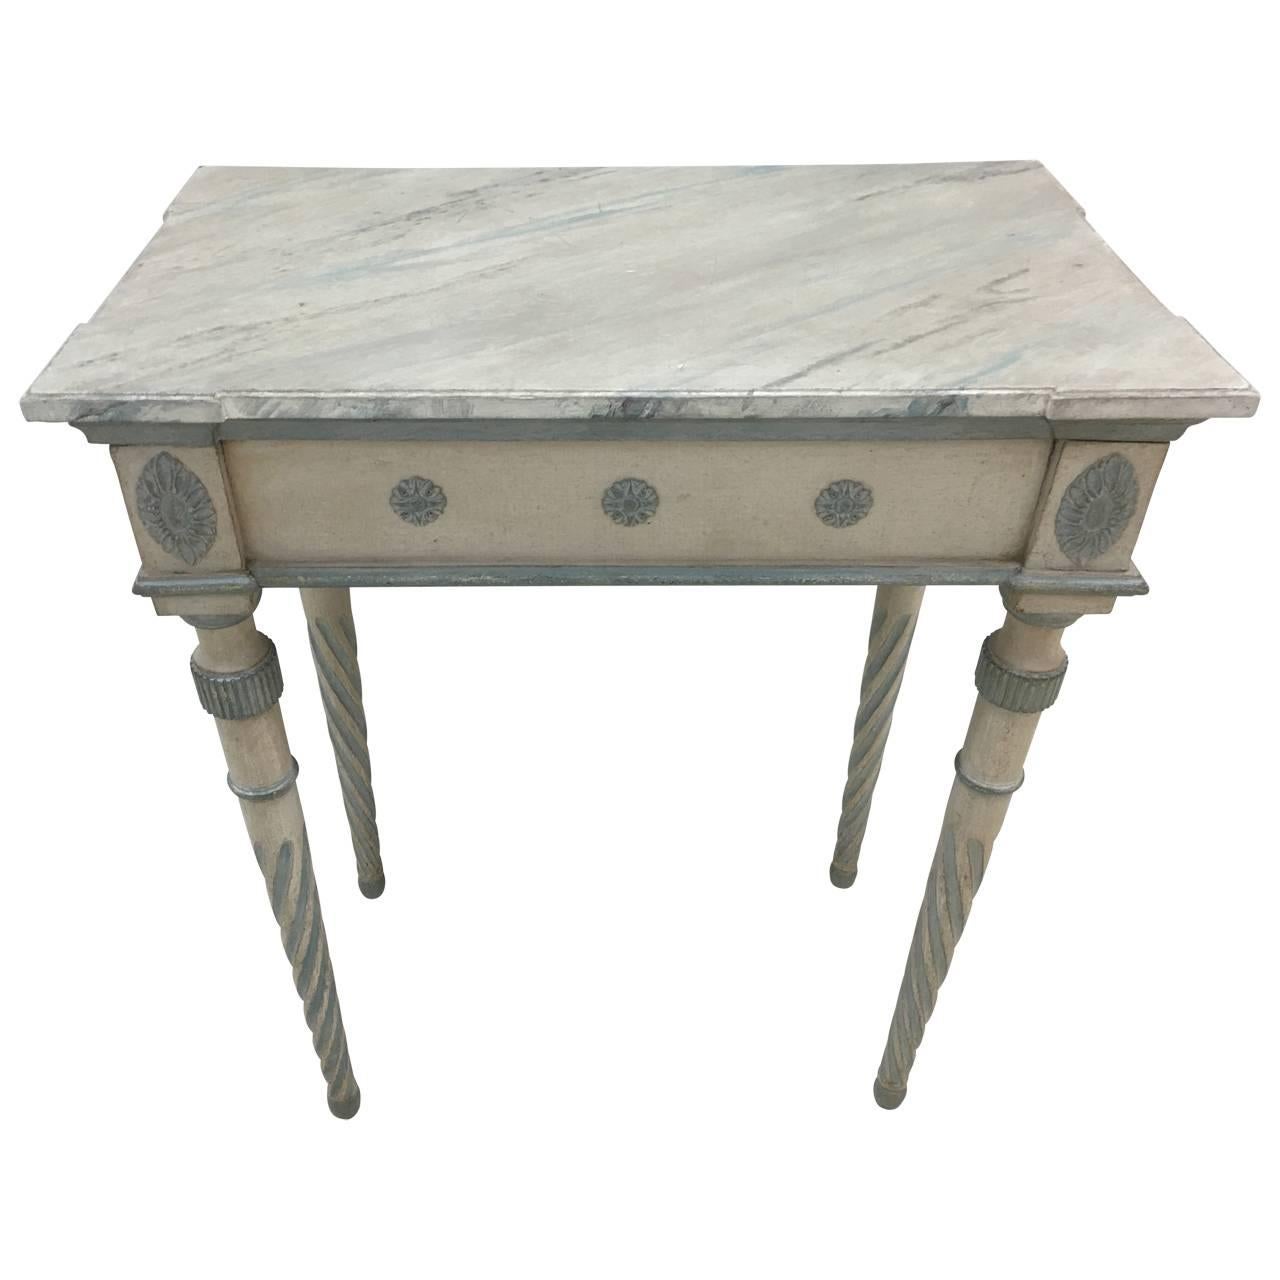 Grey and blue painted console with a faux marble wood top.